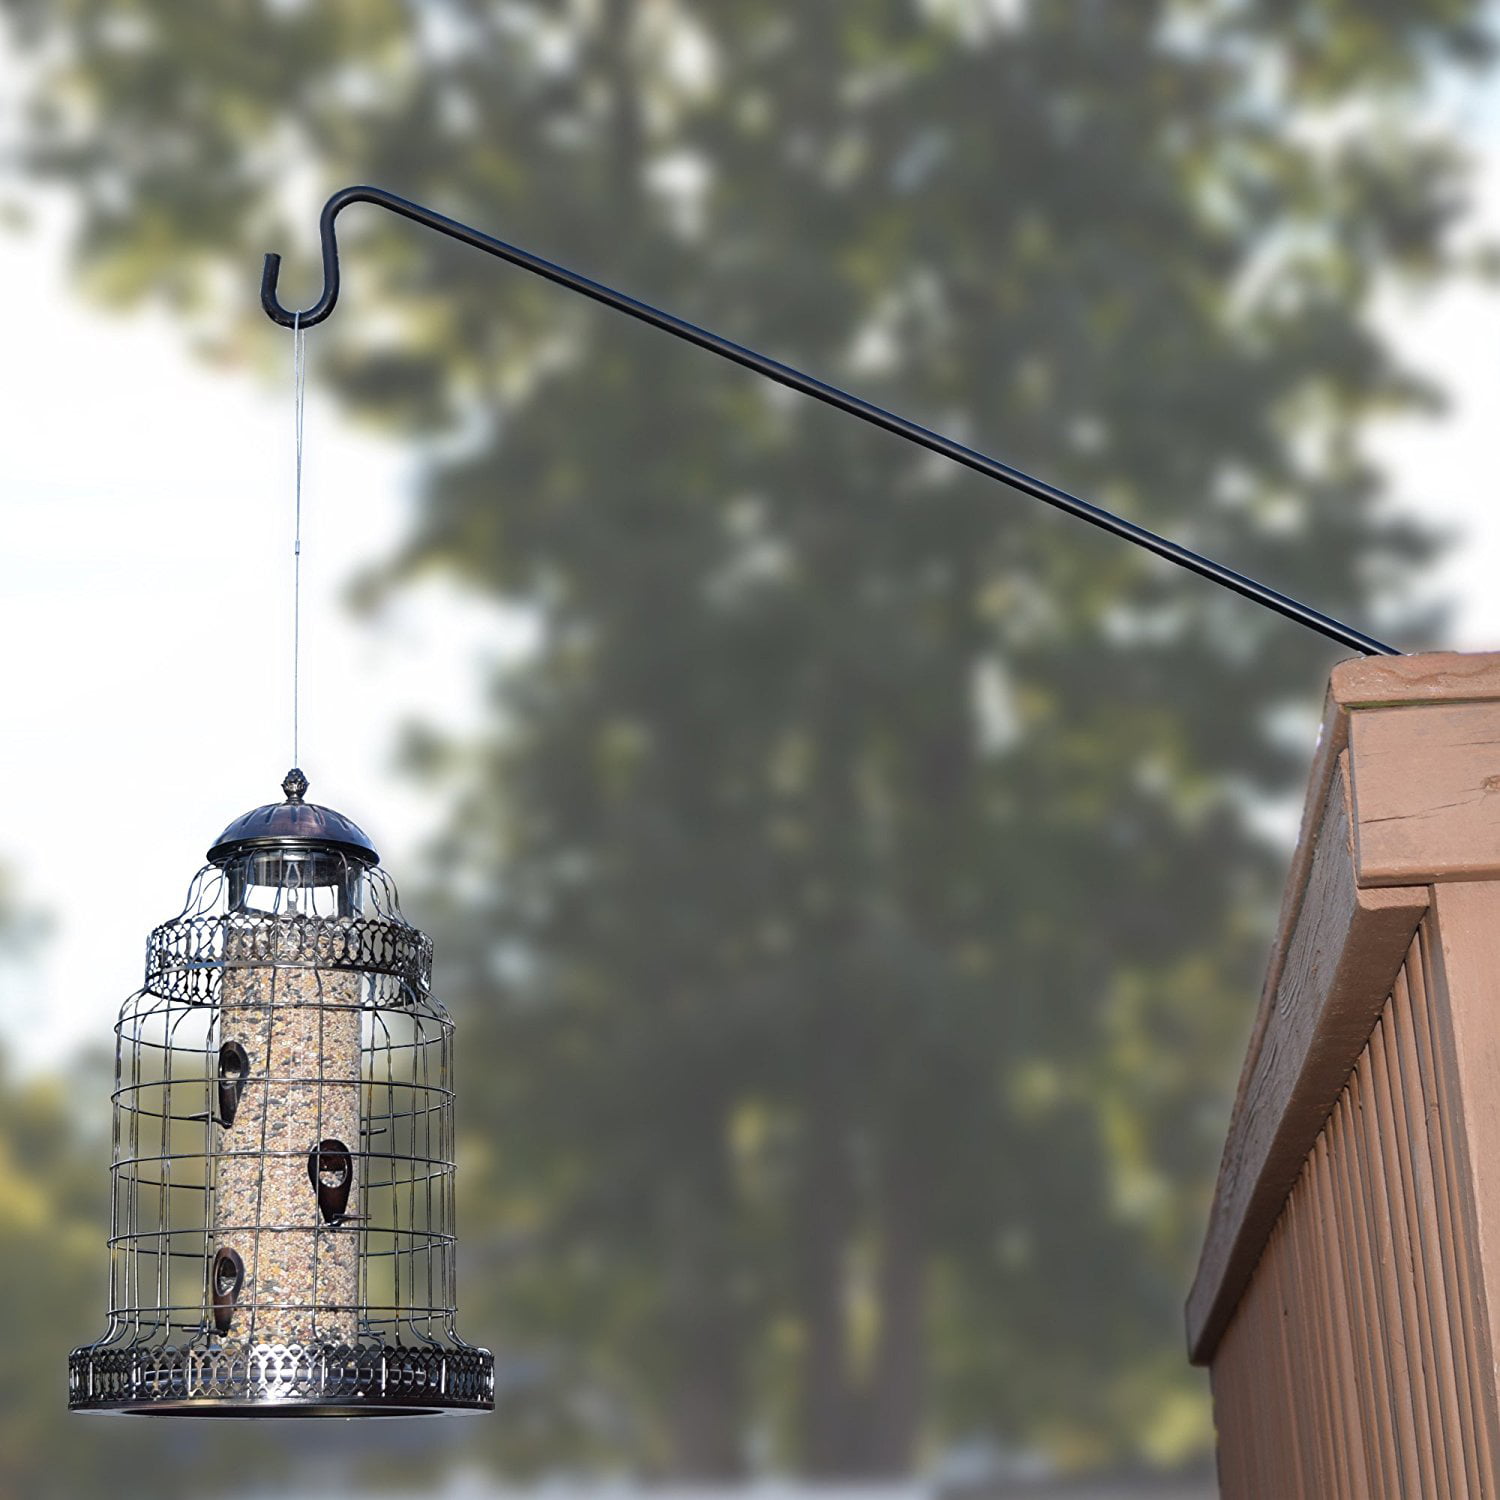 3 Inch Clamp Lanterns 49 Inch Pole for Bird Feeders Suet Baskets Planters Black Gray Bunny Heavy Duty Extended Reach Deck Hook Wind Chimes and More!